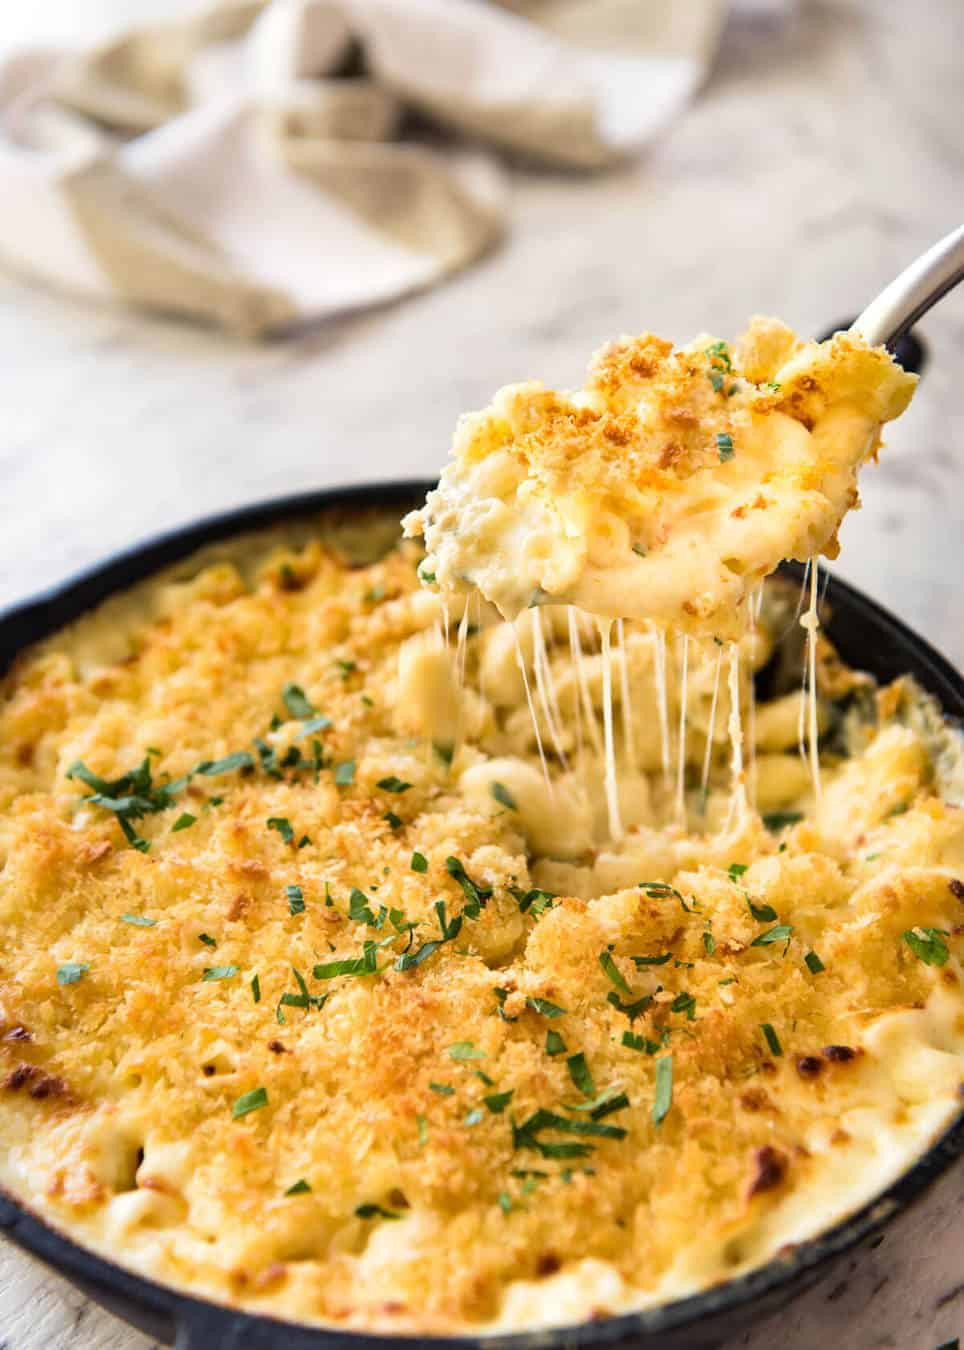 Recipes For Baked Macaroni And Cheese
 Baked Mac and Cheese